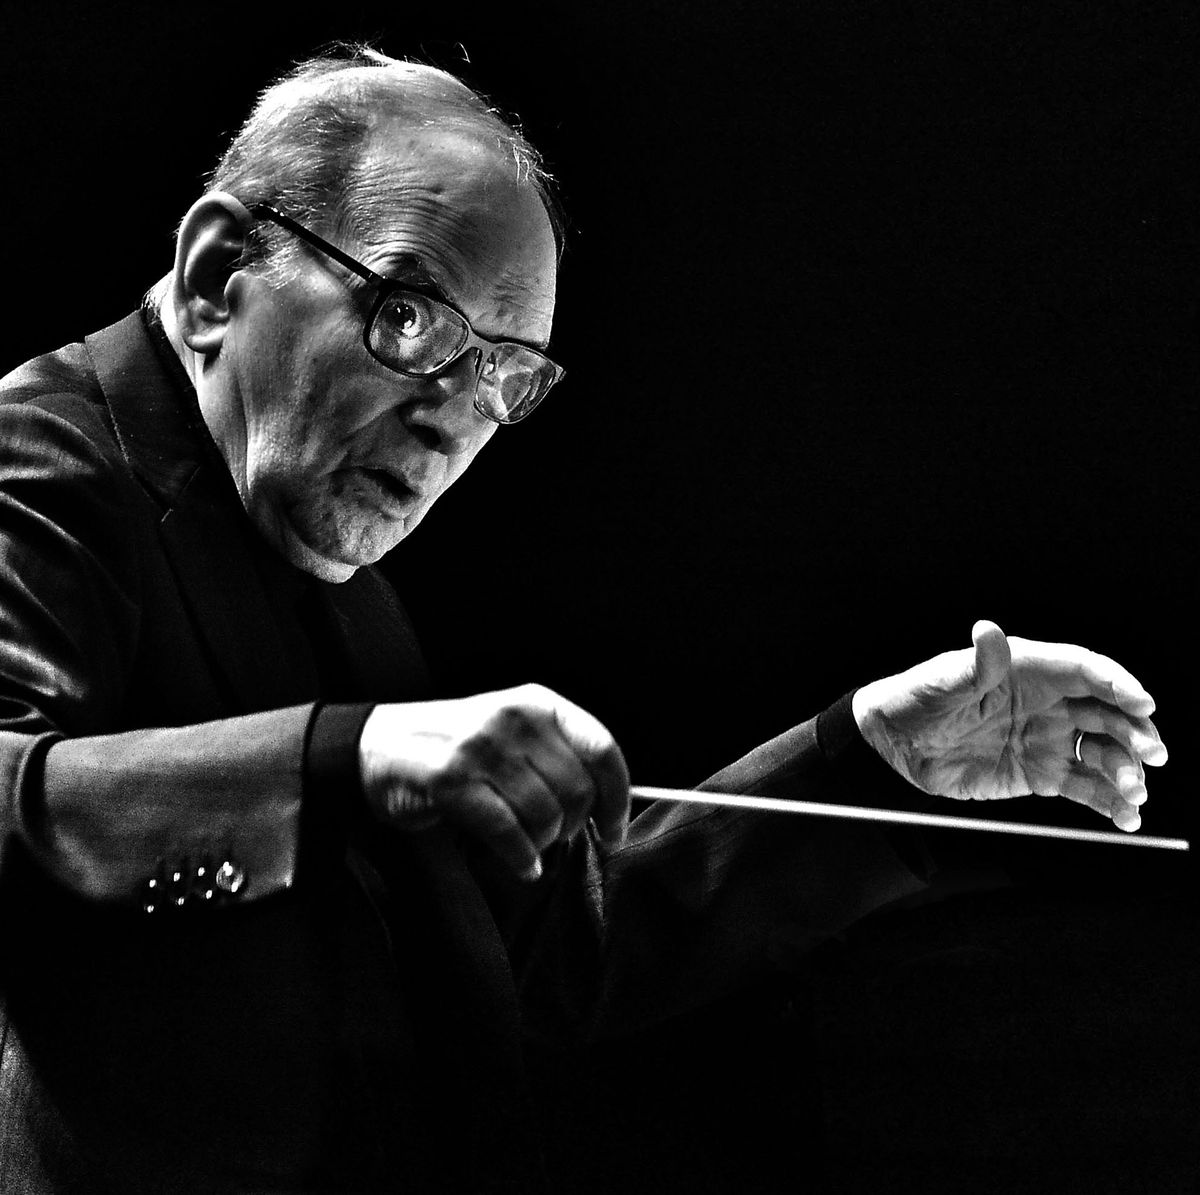 london, england   february 16  editors note image has been digitally retouched  italian composer ennio morricone performs at the o2 arena, on february 16, 2016 in london, england  photo by jim dysonredferns